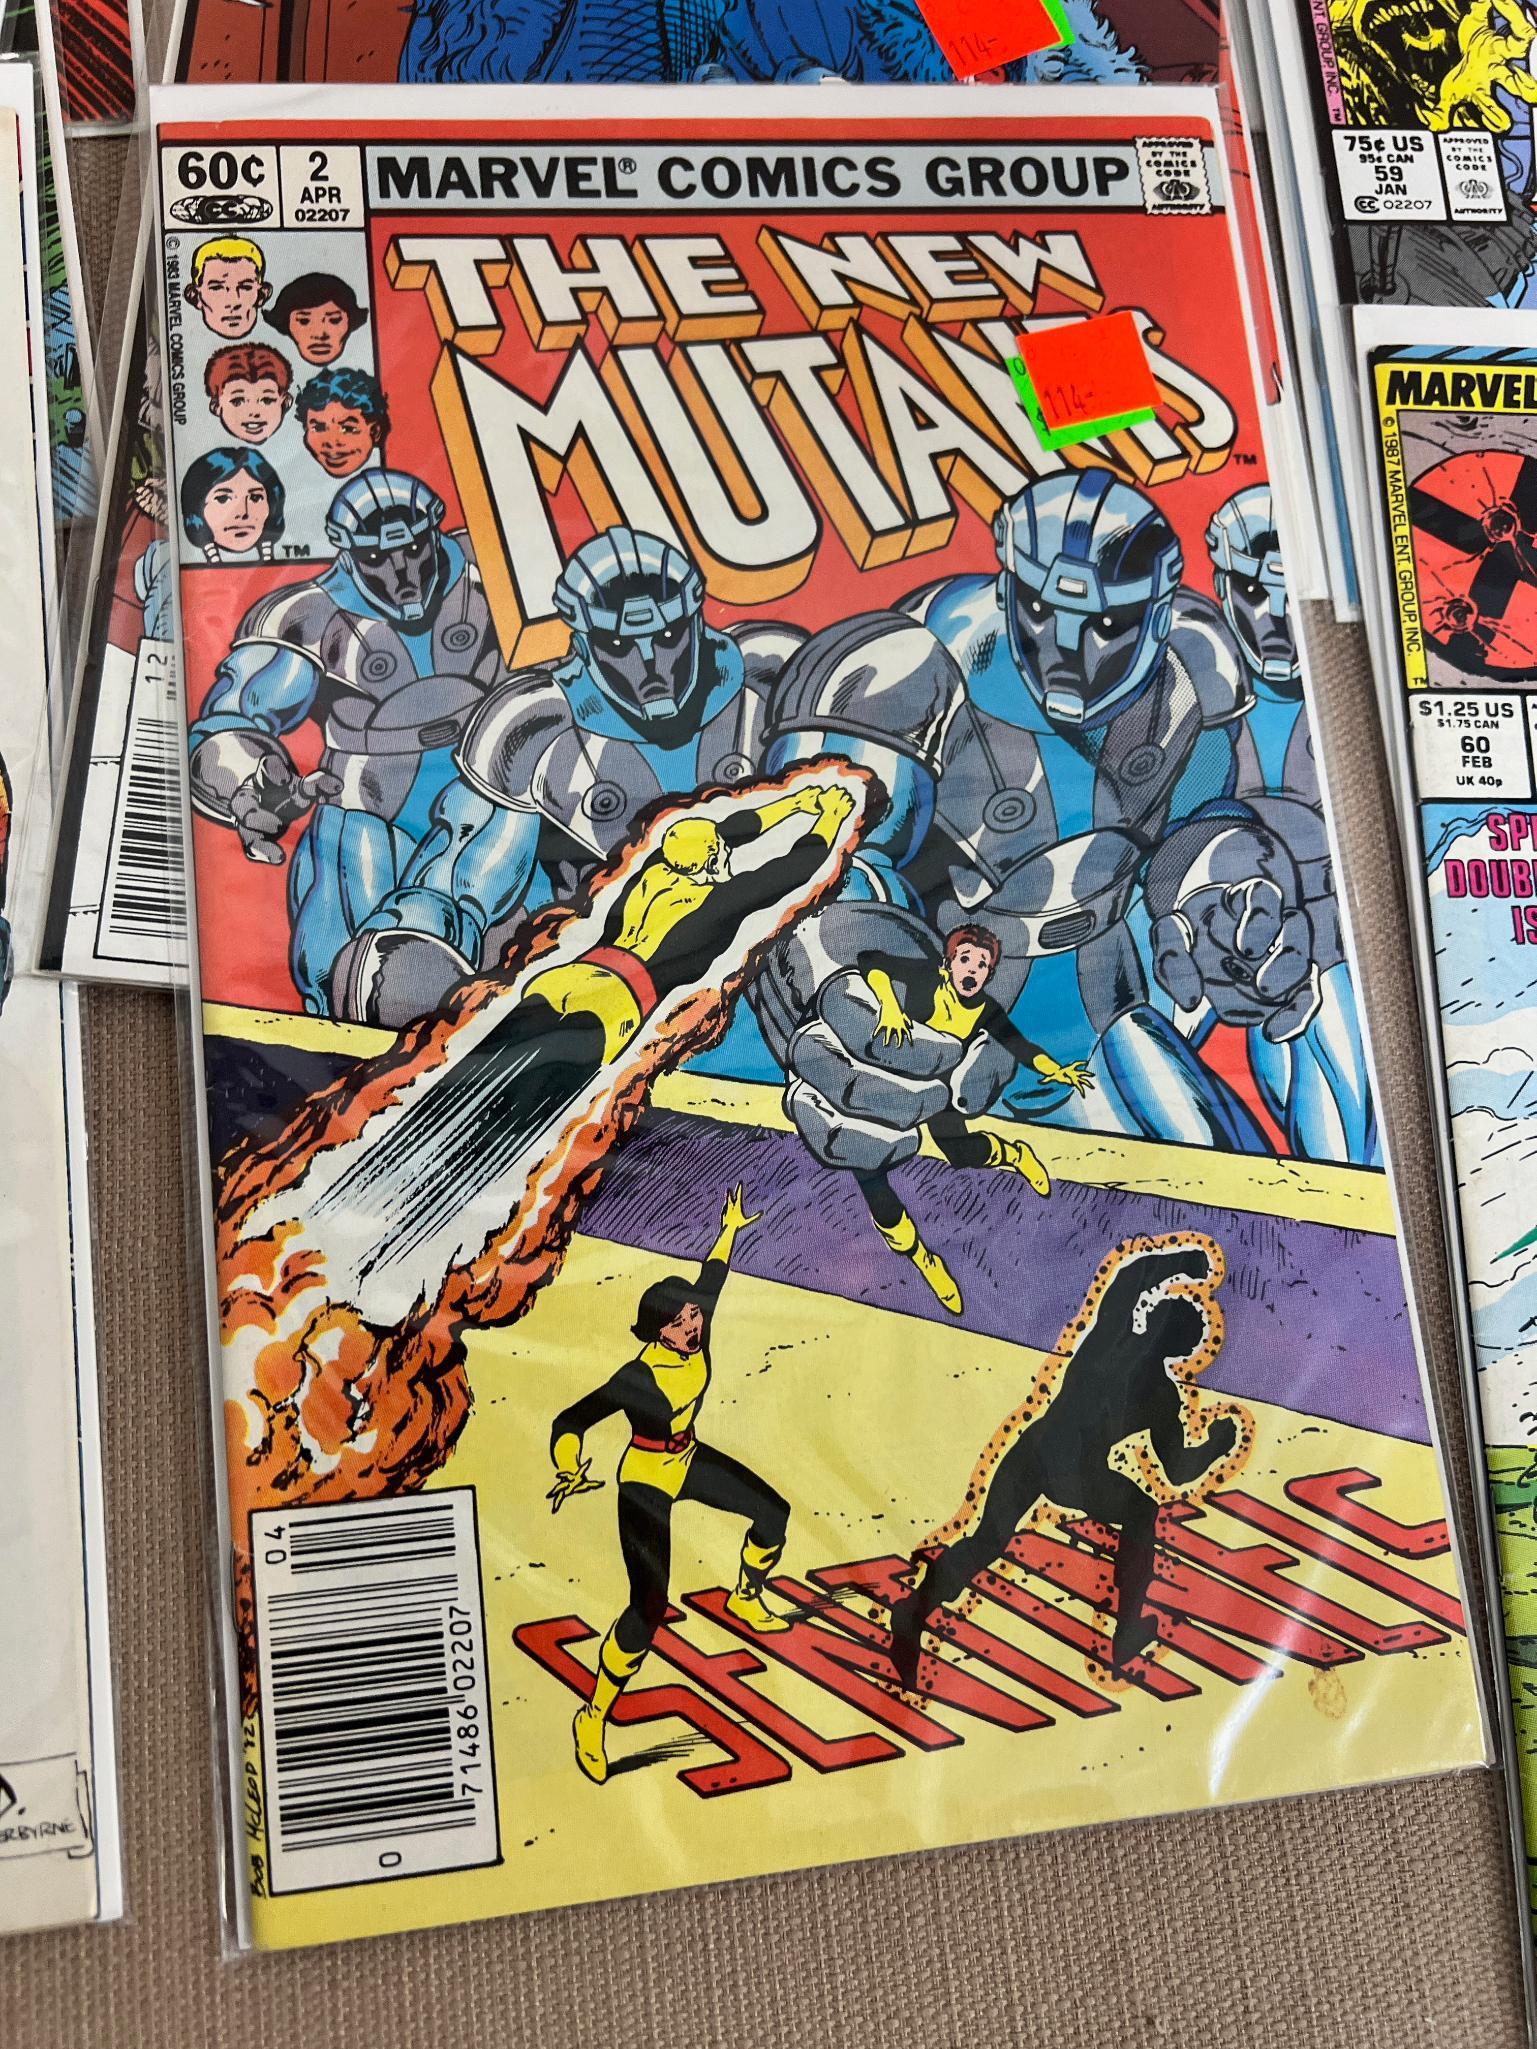 24- The New Mutants including no. 2 & 100 and other early Issues, 1st Cable, and Shatterstar